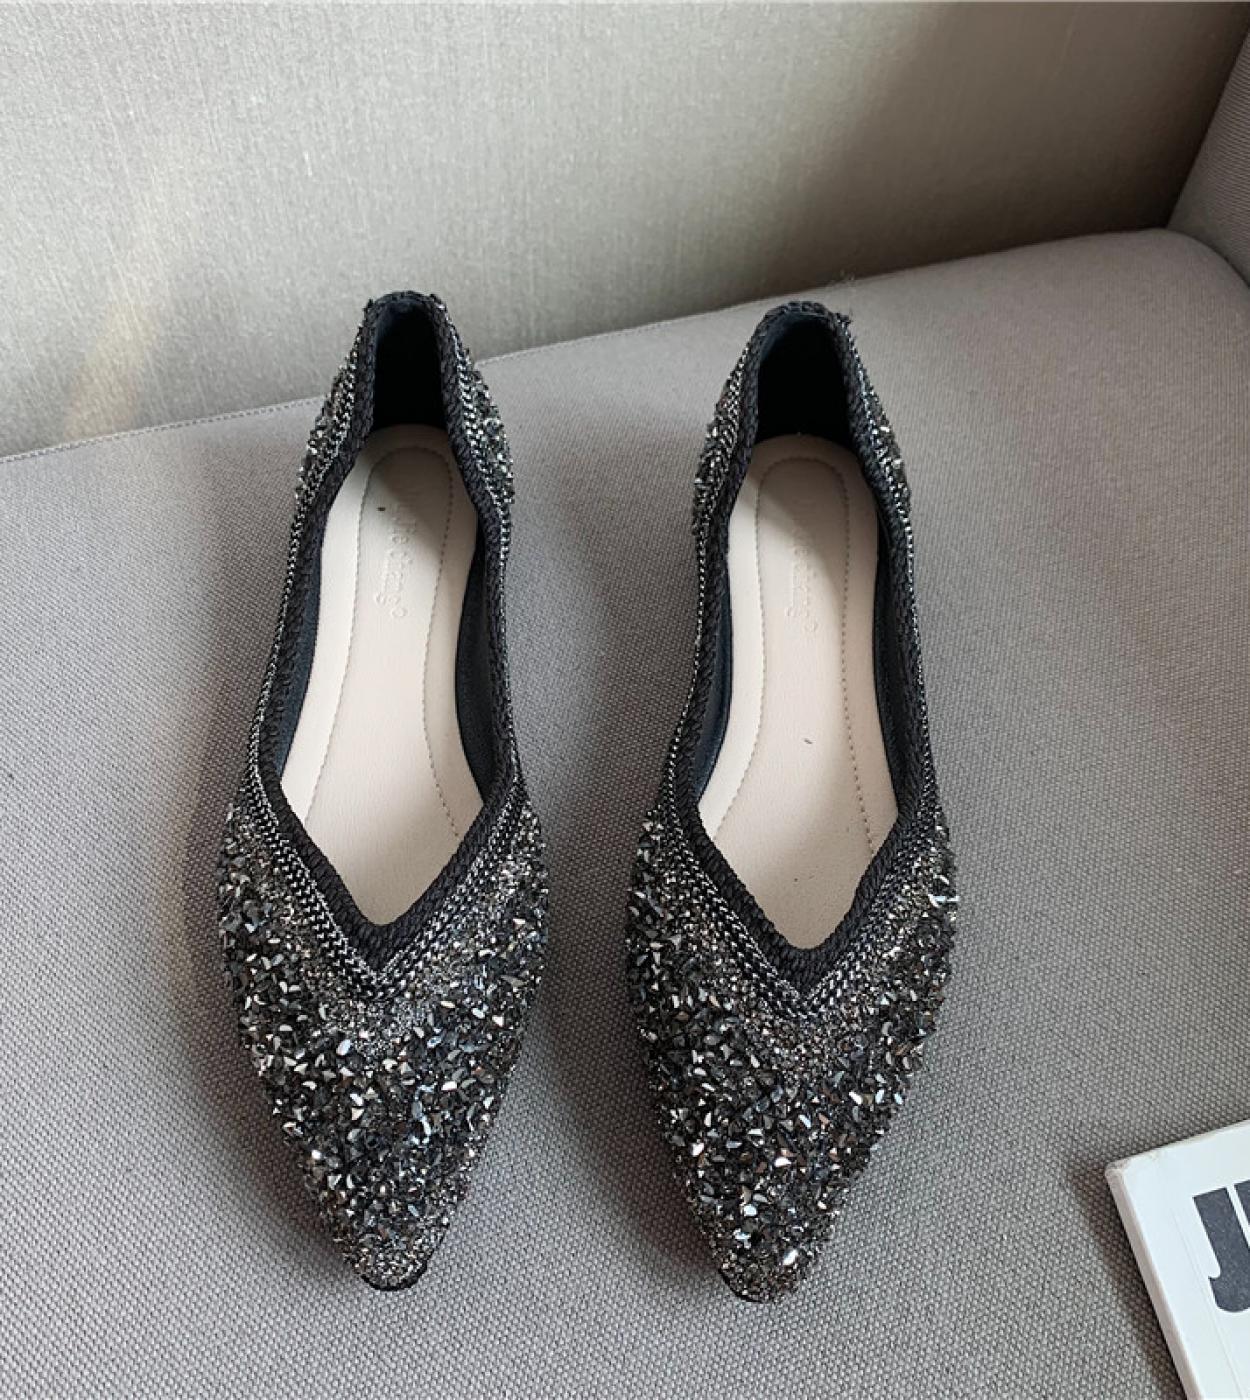 Green Pointed Toe Ballet Flats Women Chains Design Rhinestone Espadrilles Moccasins Casual Plusroll Up Loafers Shoeswome